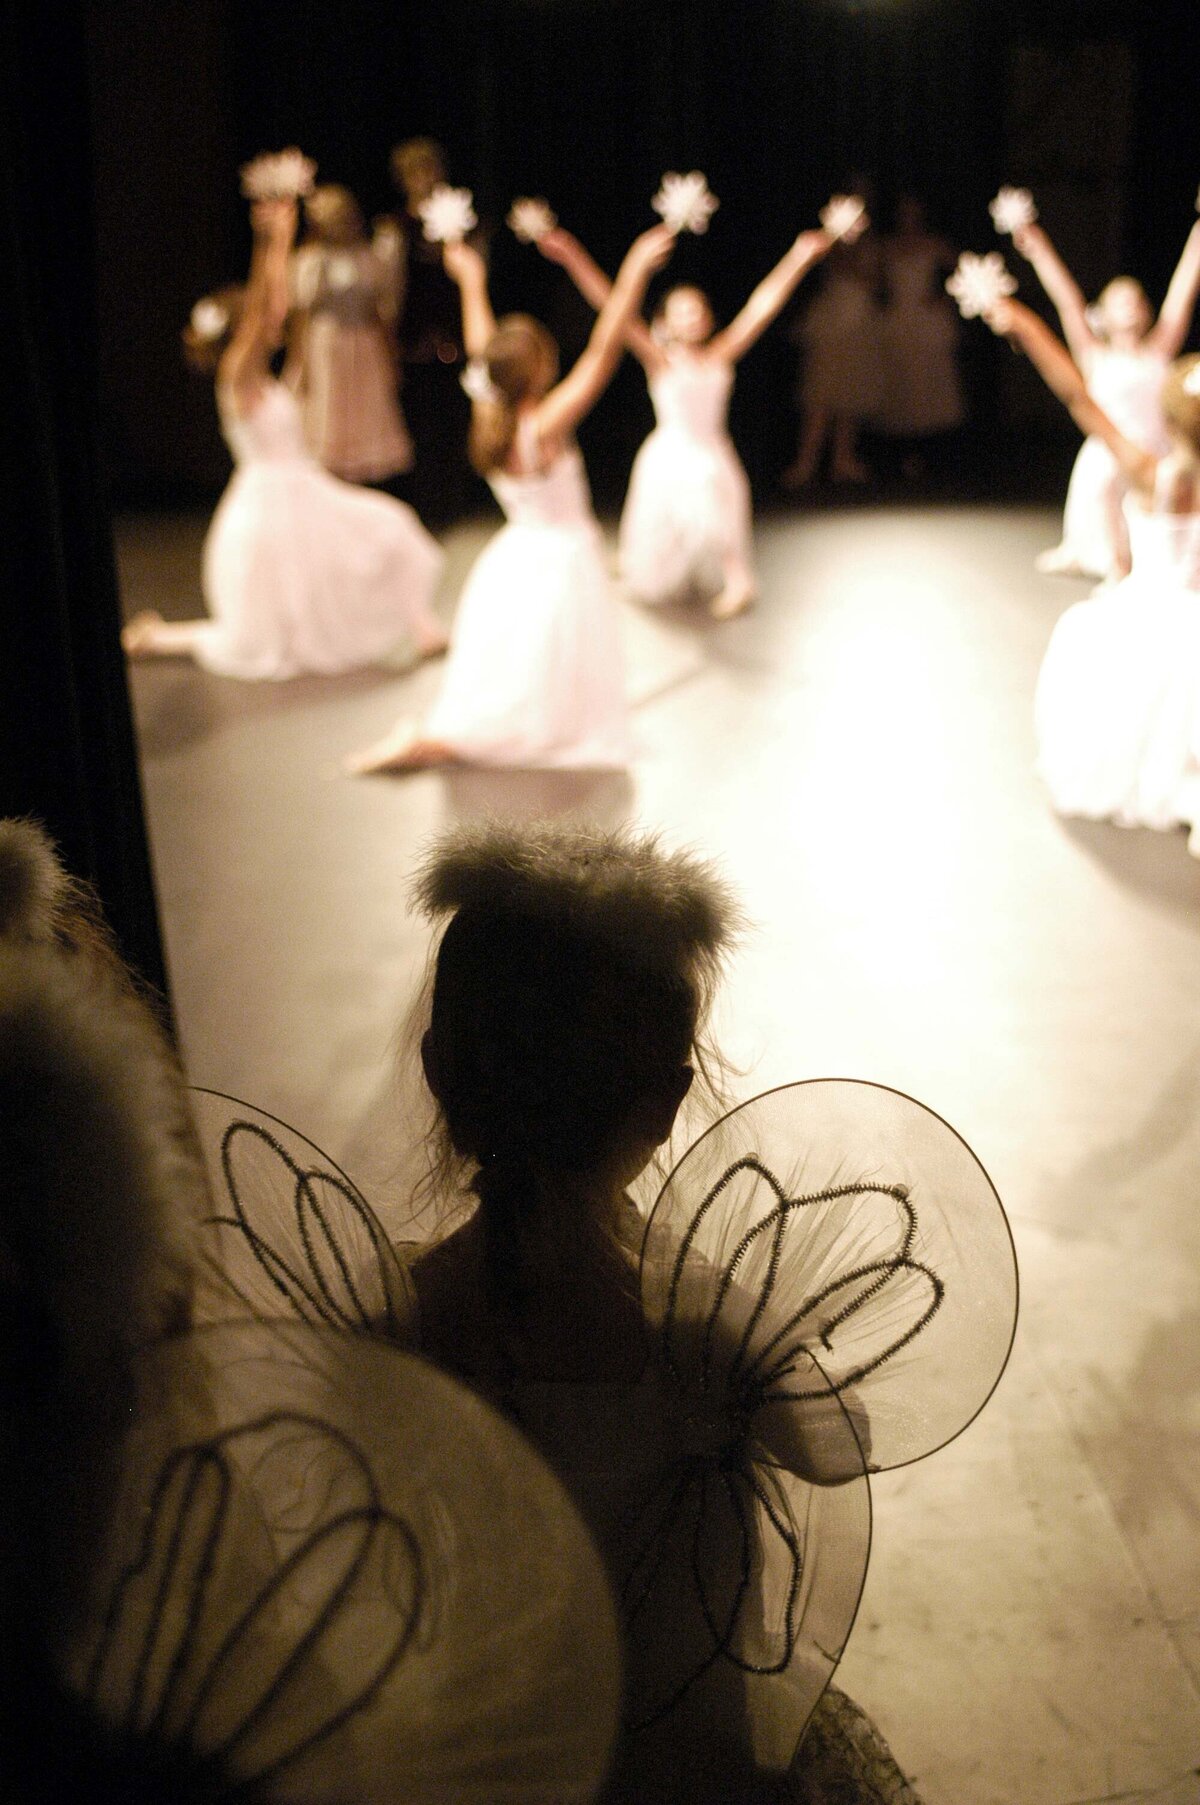 A little dancer watches older modern dance performers from the wings. She wears angel wings and is silhouetted by the stage light to imply a story